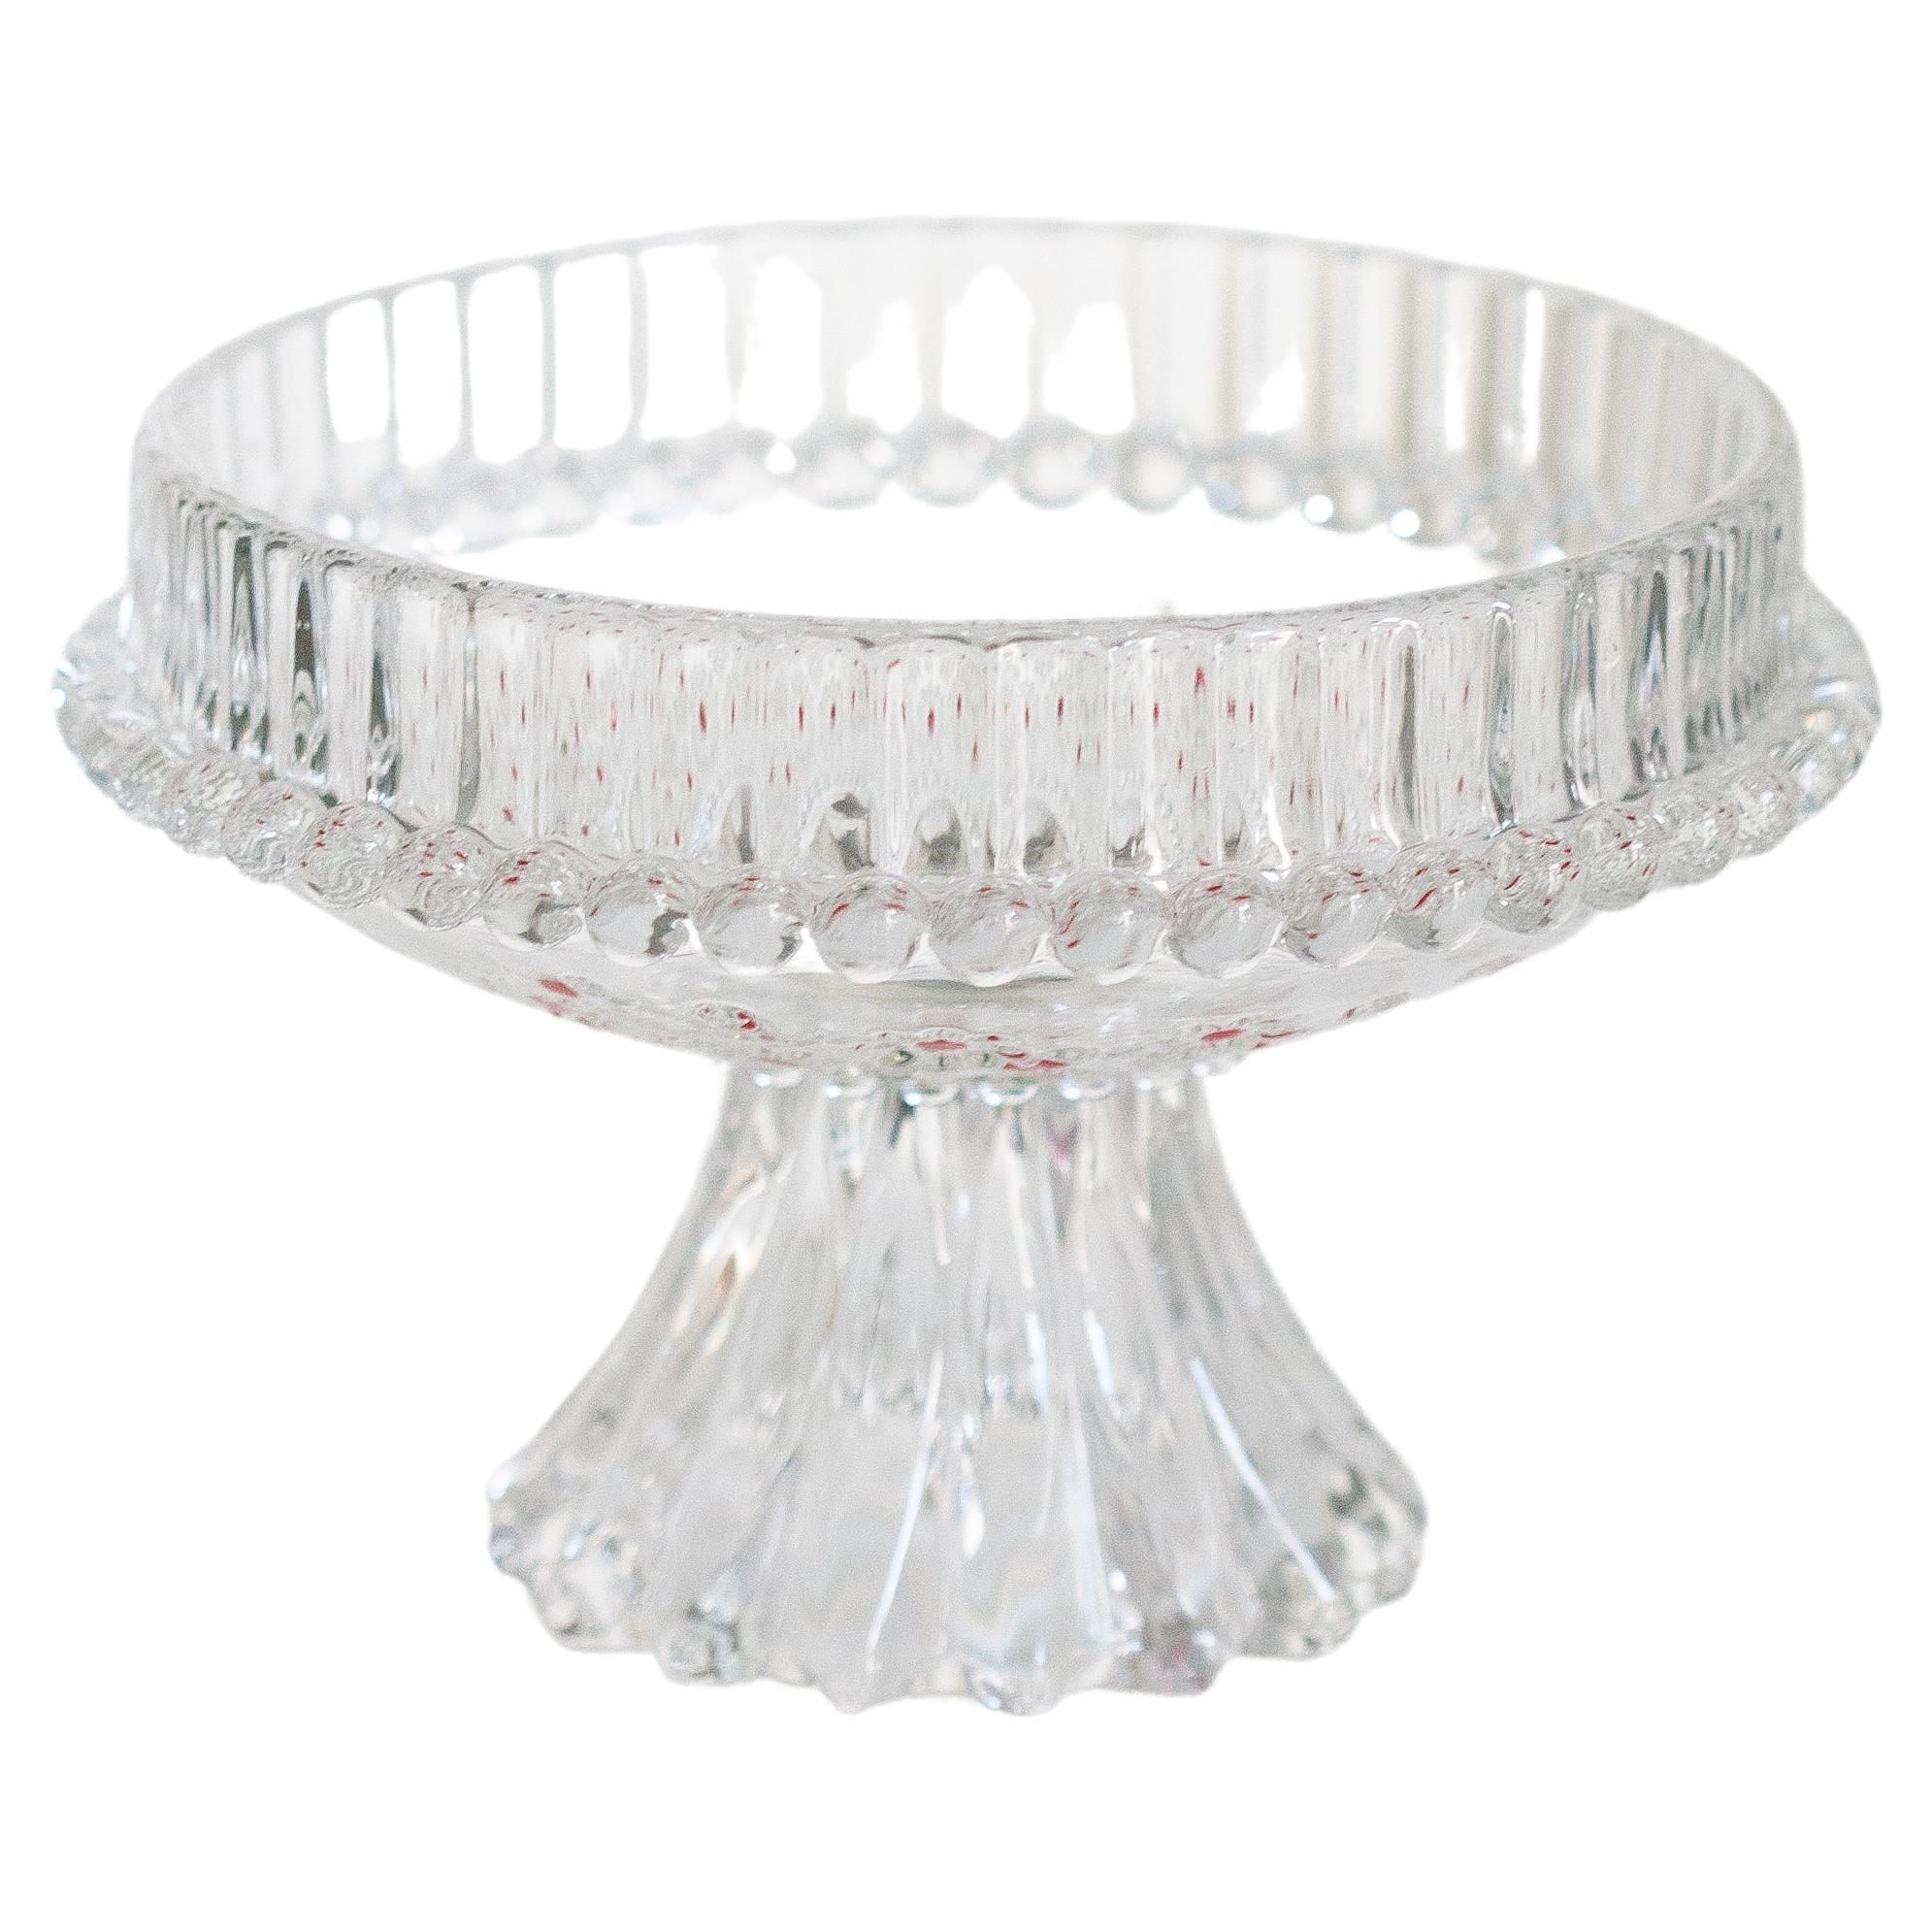 Vintage Transparent Decorative Crystal Glass Plate, Italy, 1960s For Sale